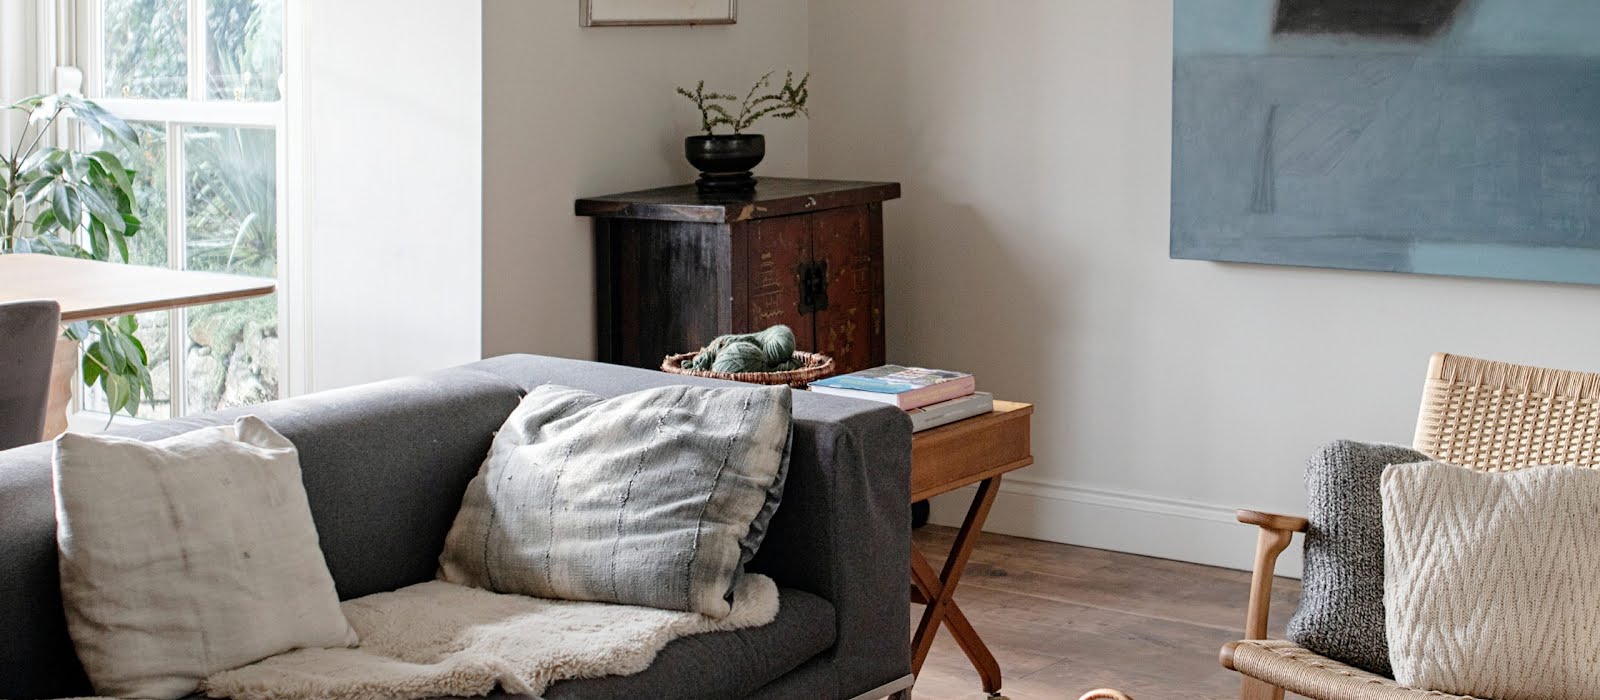 Shop the house shoot: Inside this incredible Monkstown home